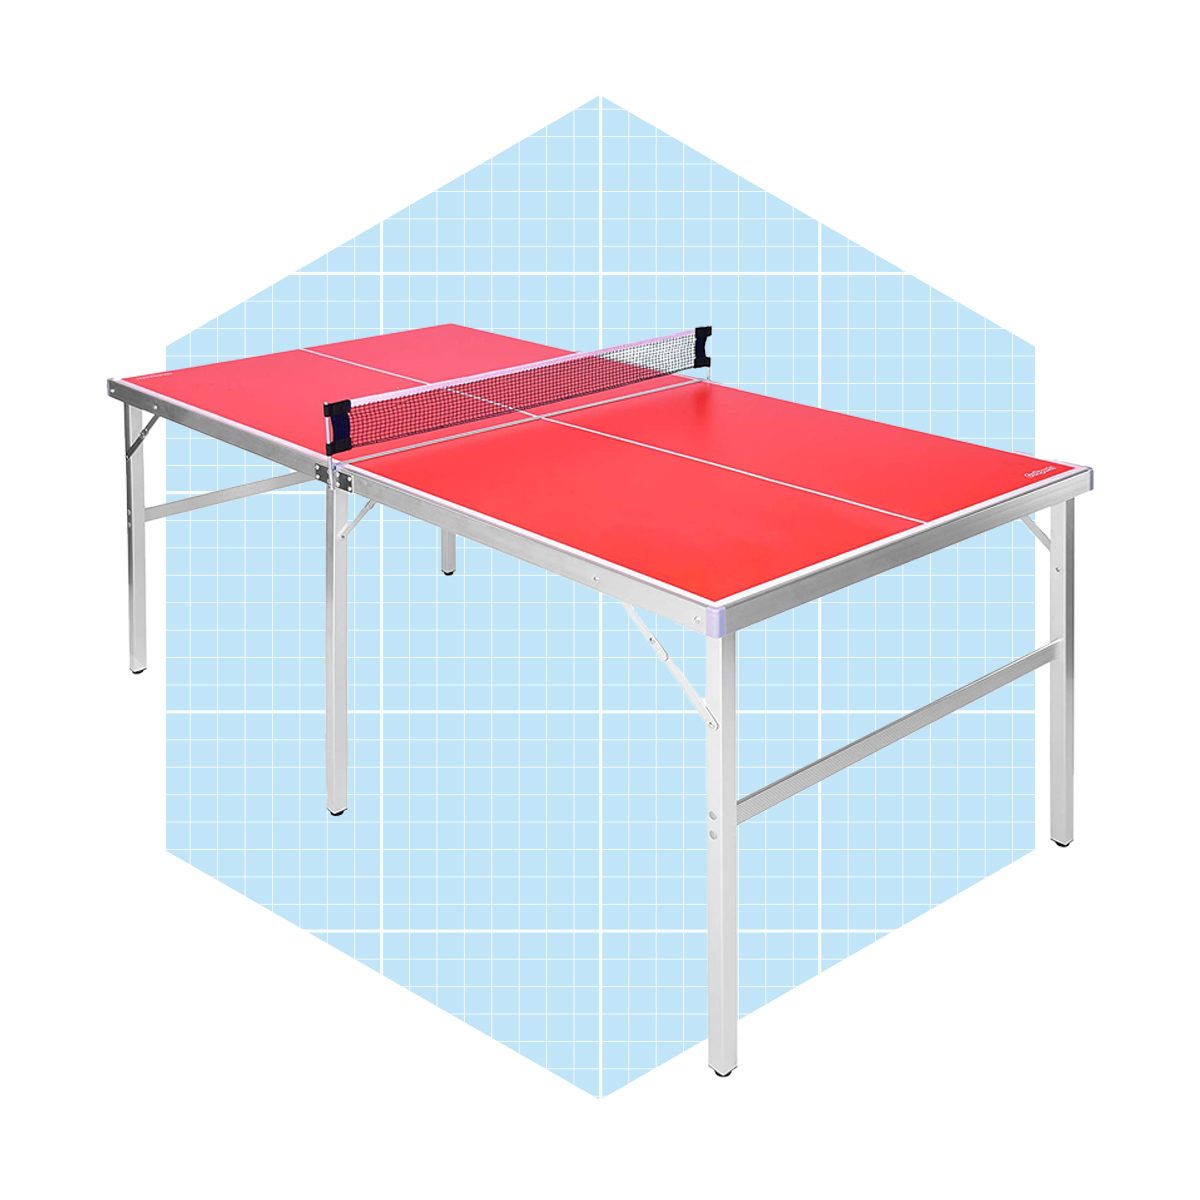 700 Ping Pong Tables and Spaces ideas